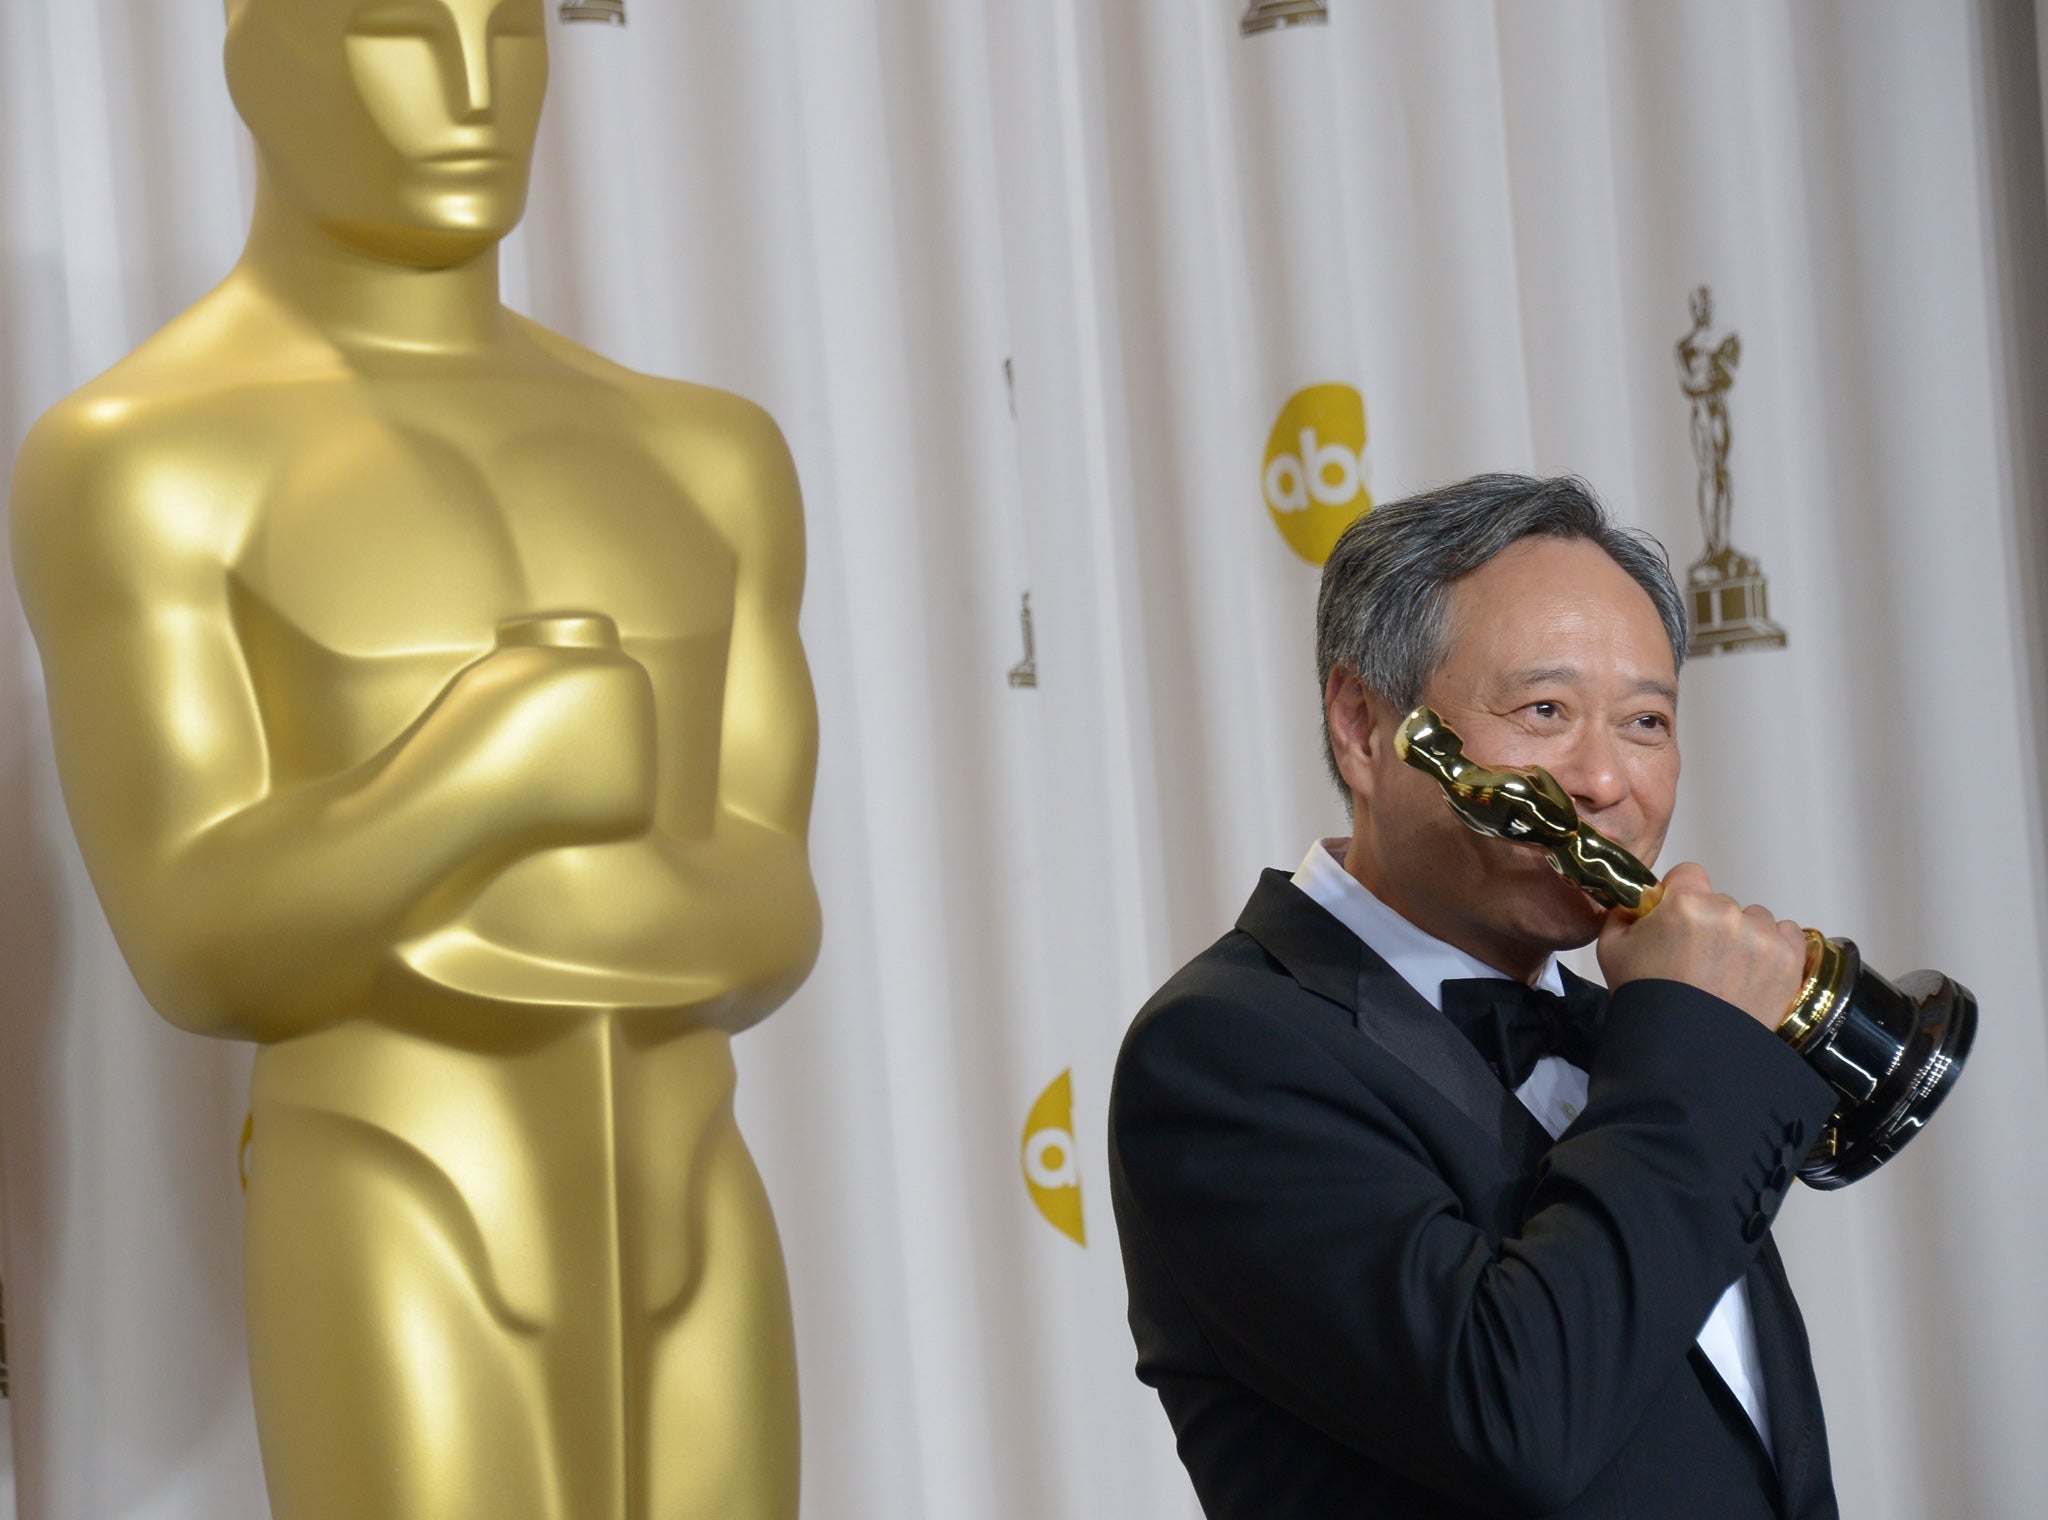 Ang Lee with his award for best director and the Oscars 2013